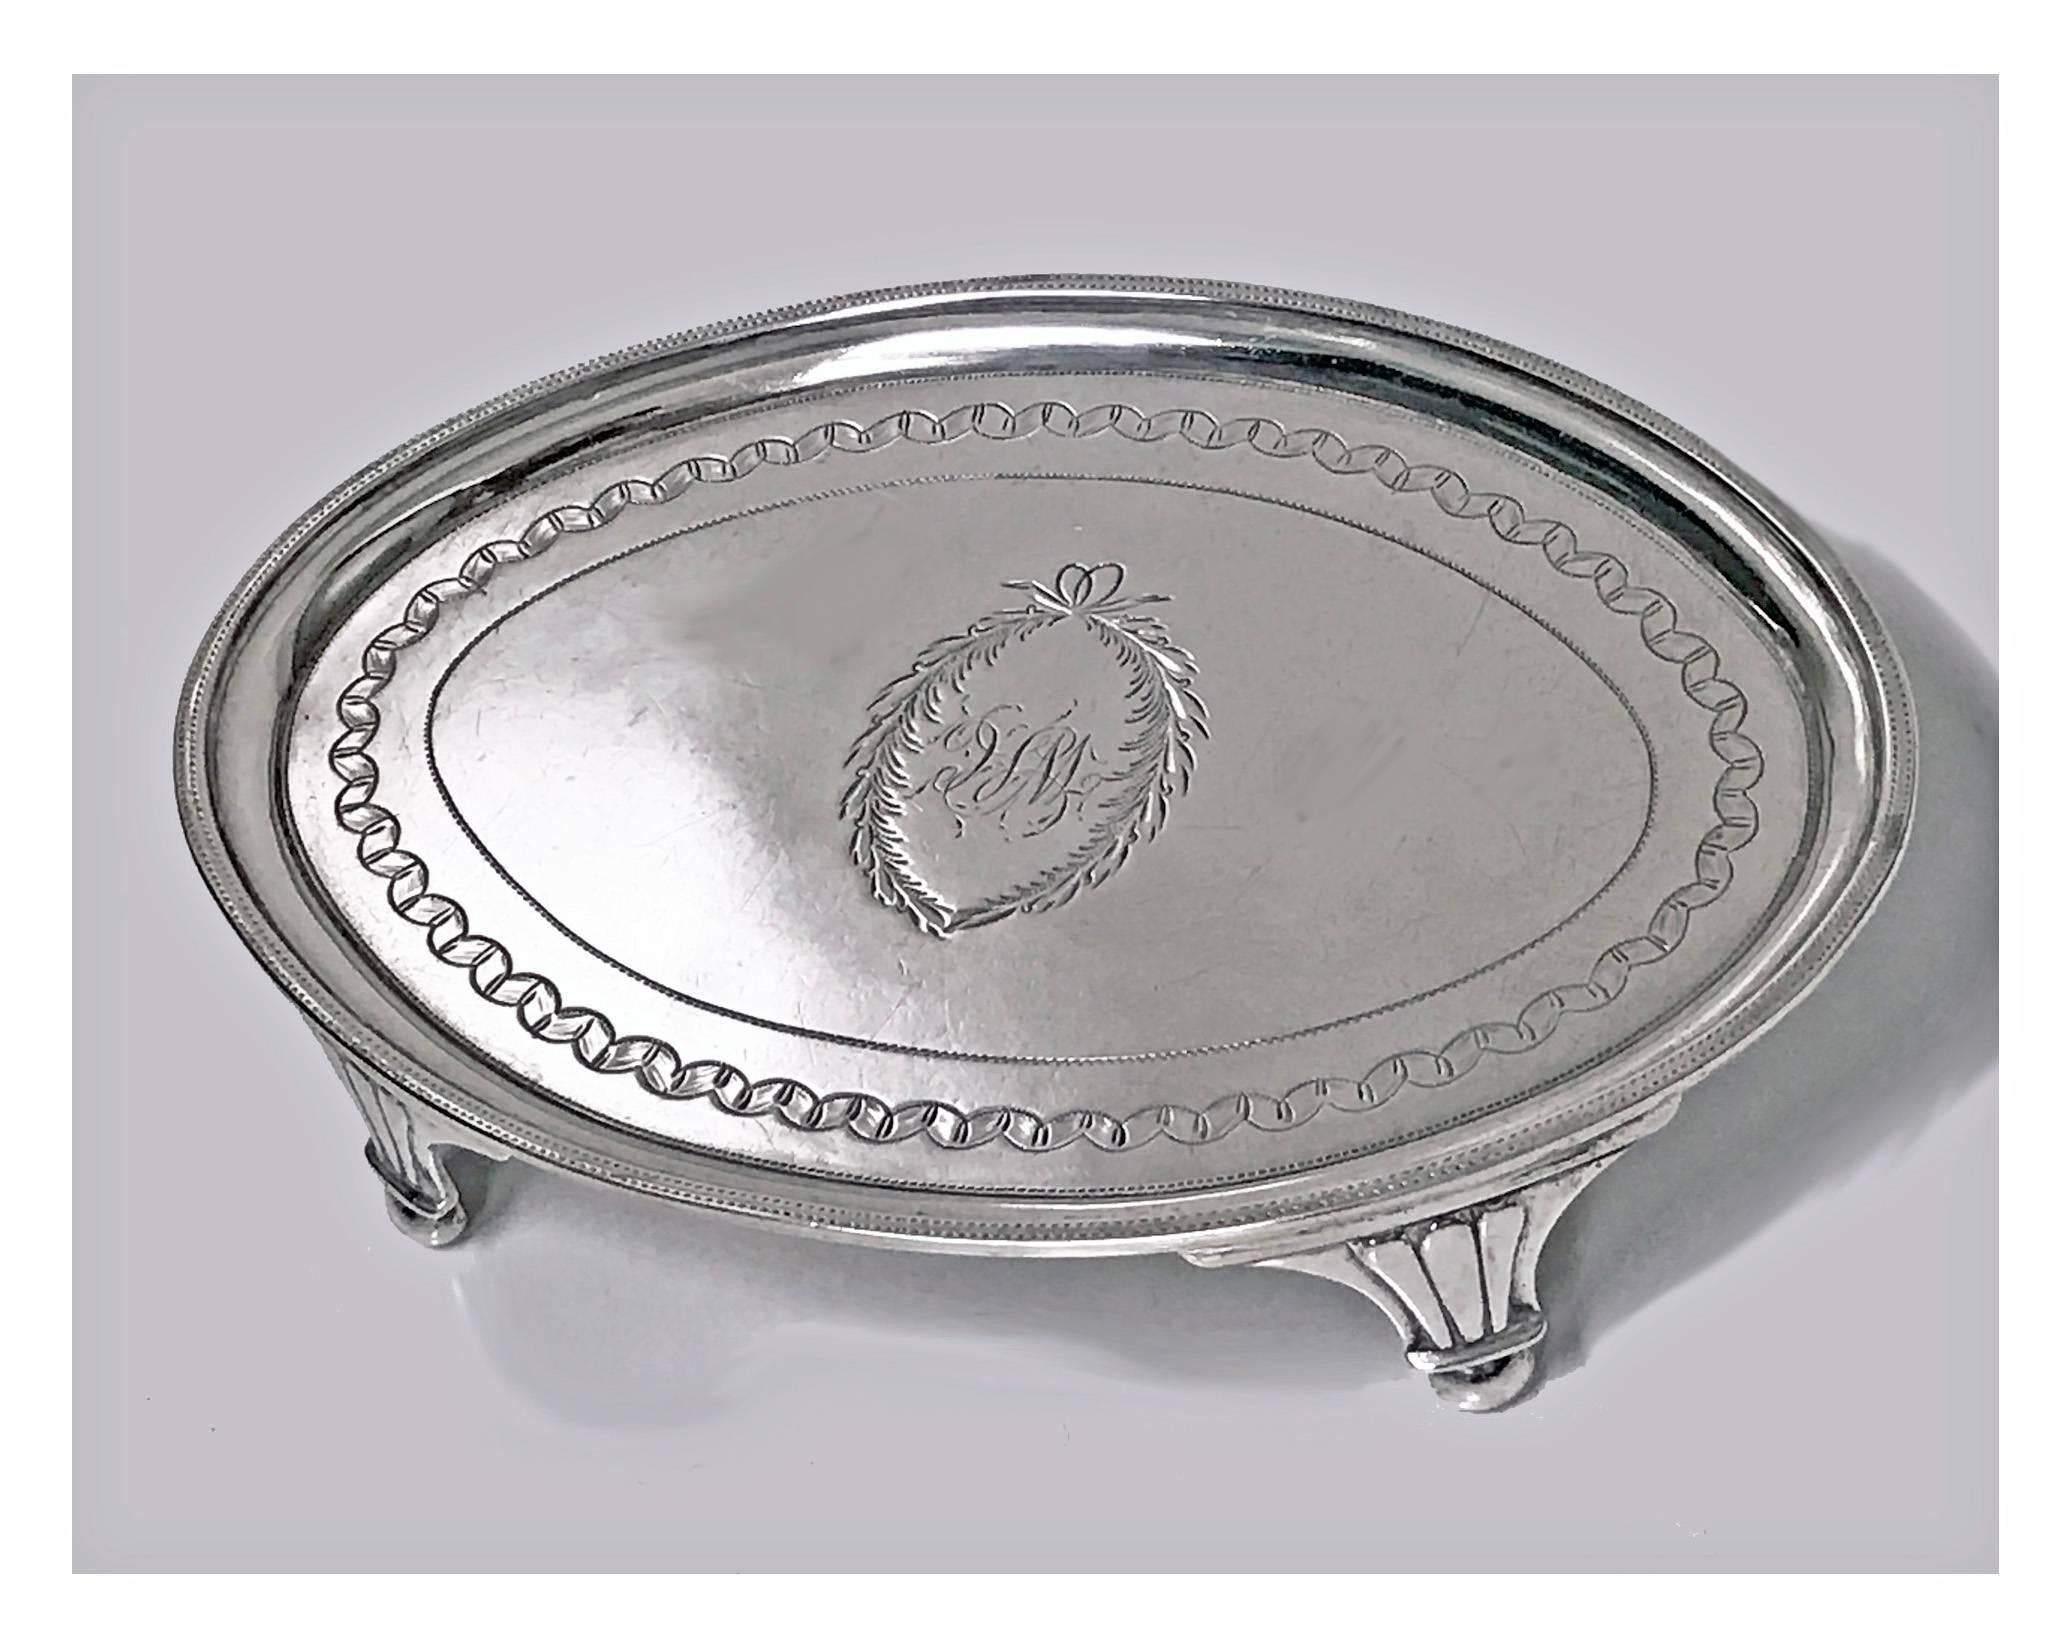 Georgian silver waiter salver or teapot stand, London, 1801, Urquhart and Hart. The oval small salver on four turned supports, the centre engraved with foliate cartouche and possibly WC, engraved pin prick design borders. Fully hall marked on